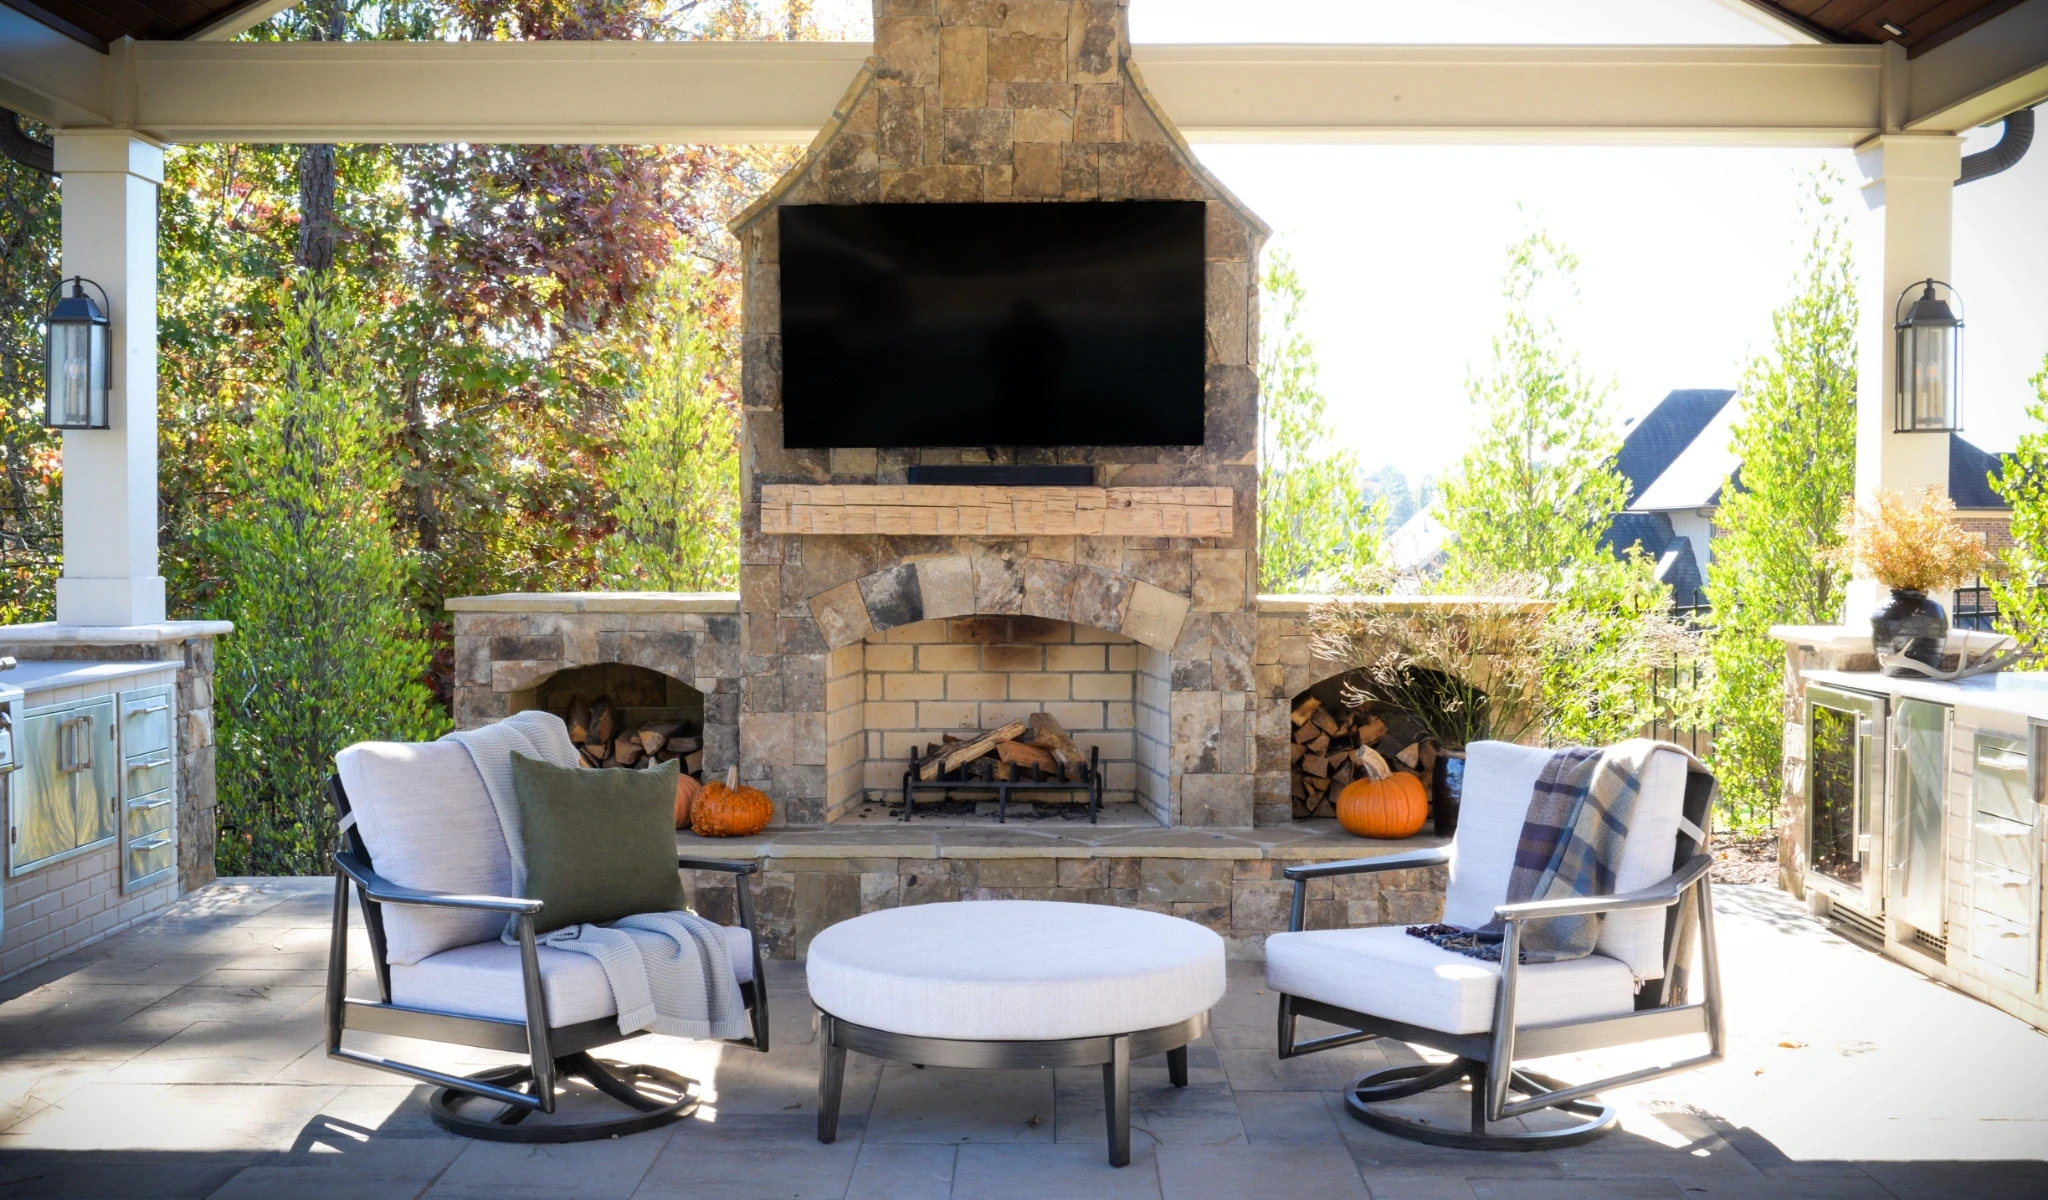 A patio with a fireplace, chairs, and a TV.